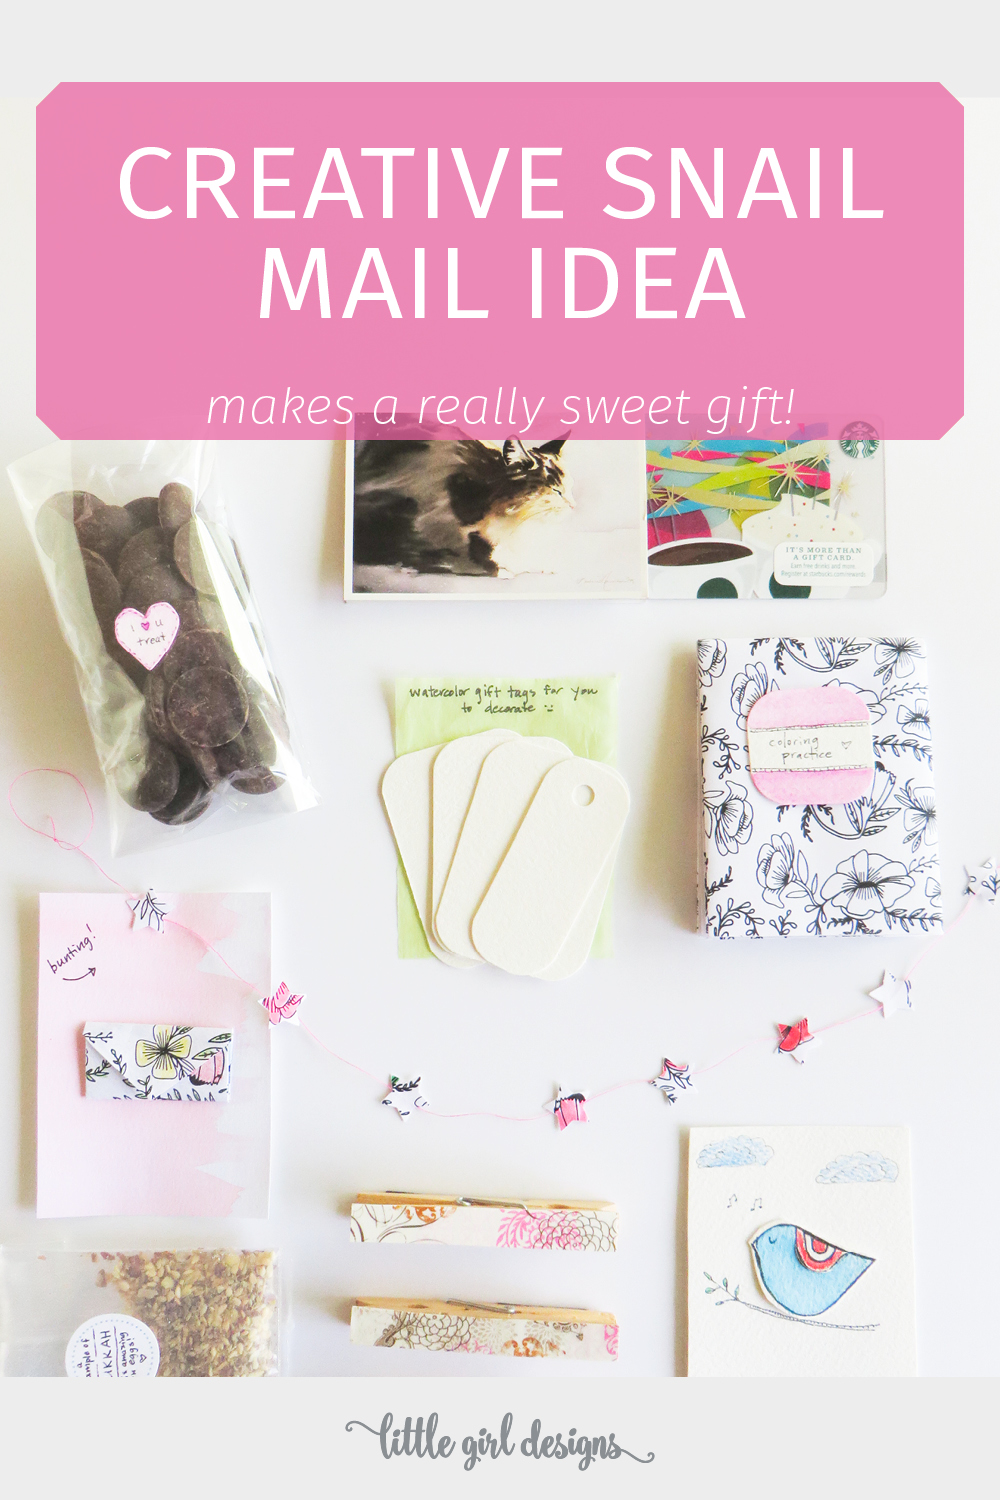 Who doesn't love receiving letters and packages in the mail? Pocket letters are such a creative idea for snail mail and are great for pen pals.The best part is you can easily fold them into an envelope. Get inspiration for your own DIY snail mail gift when you click through!